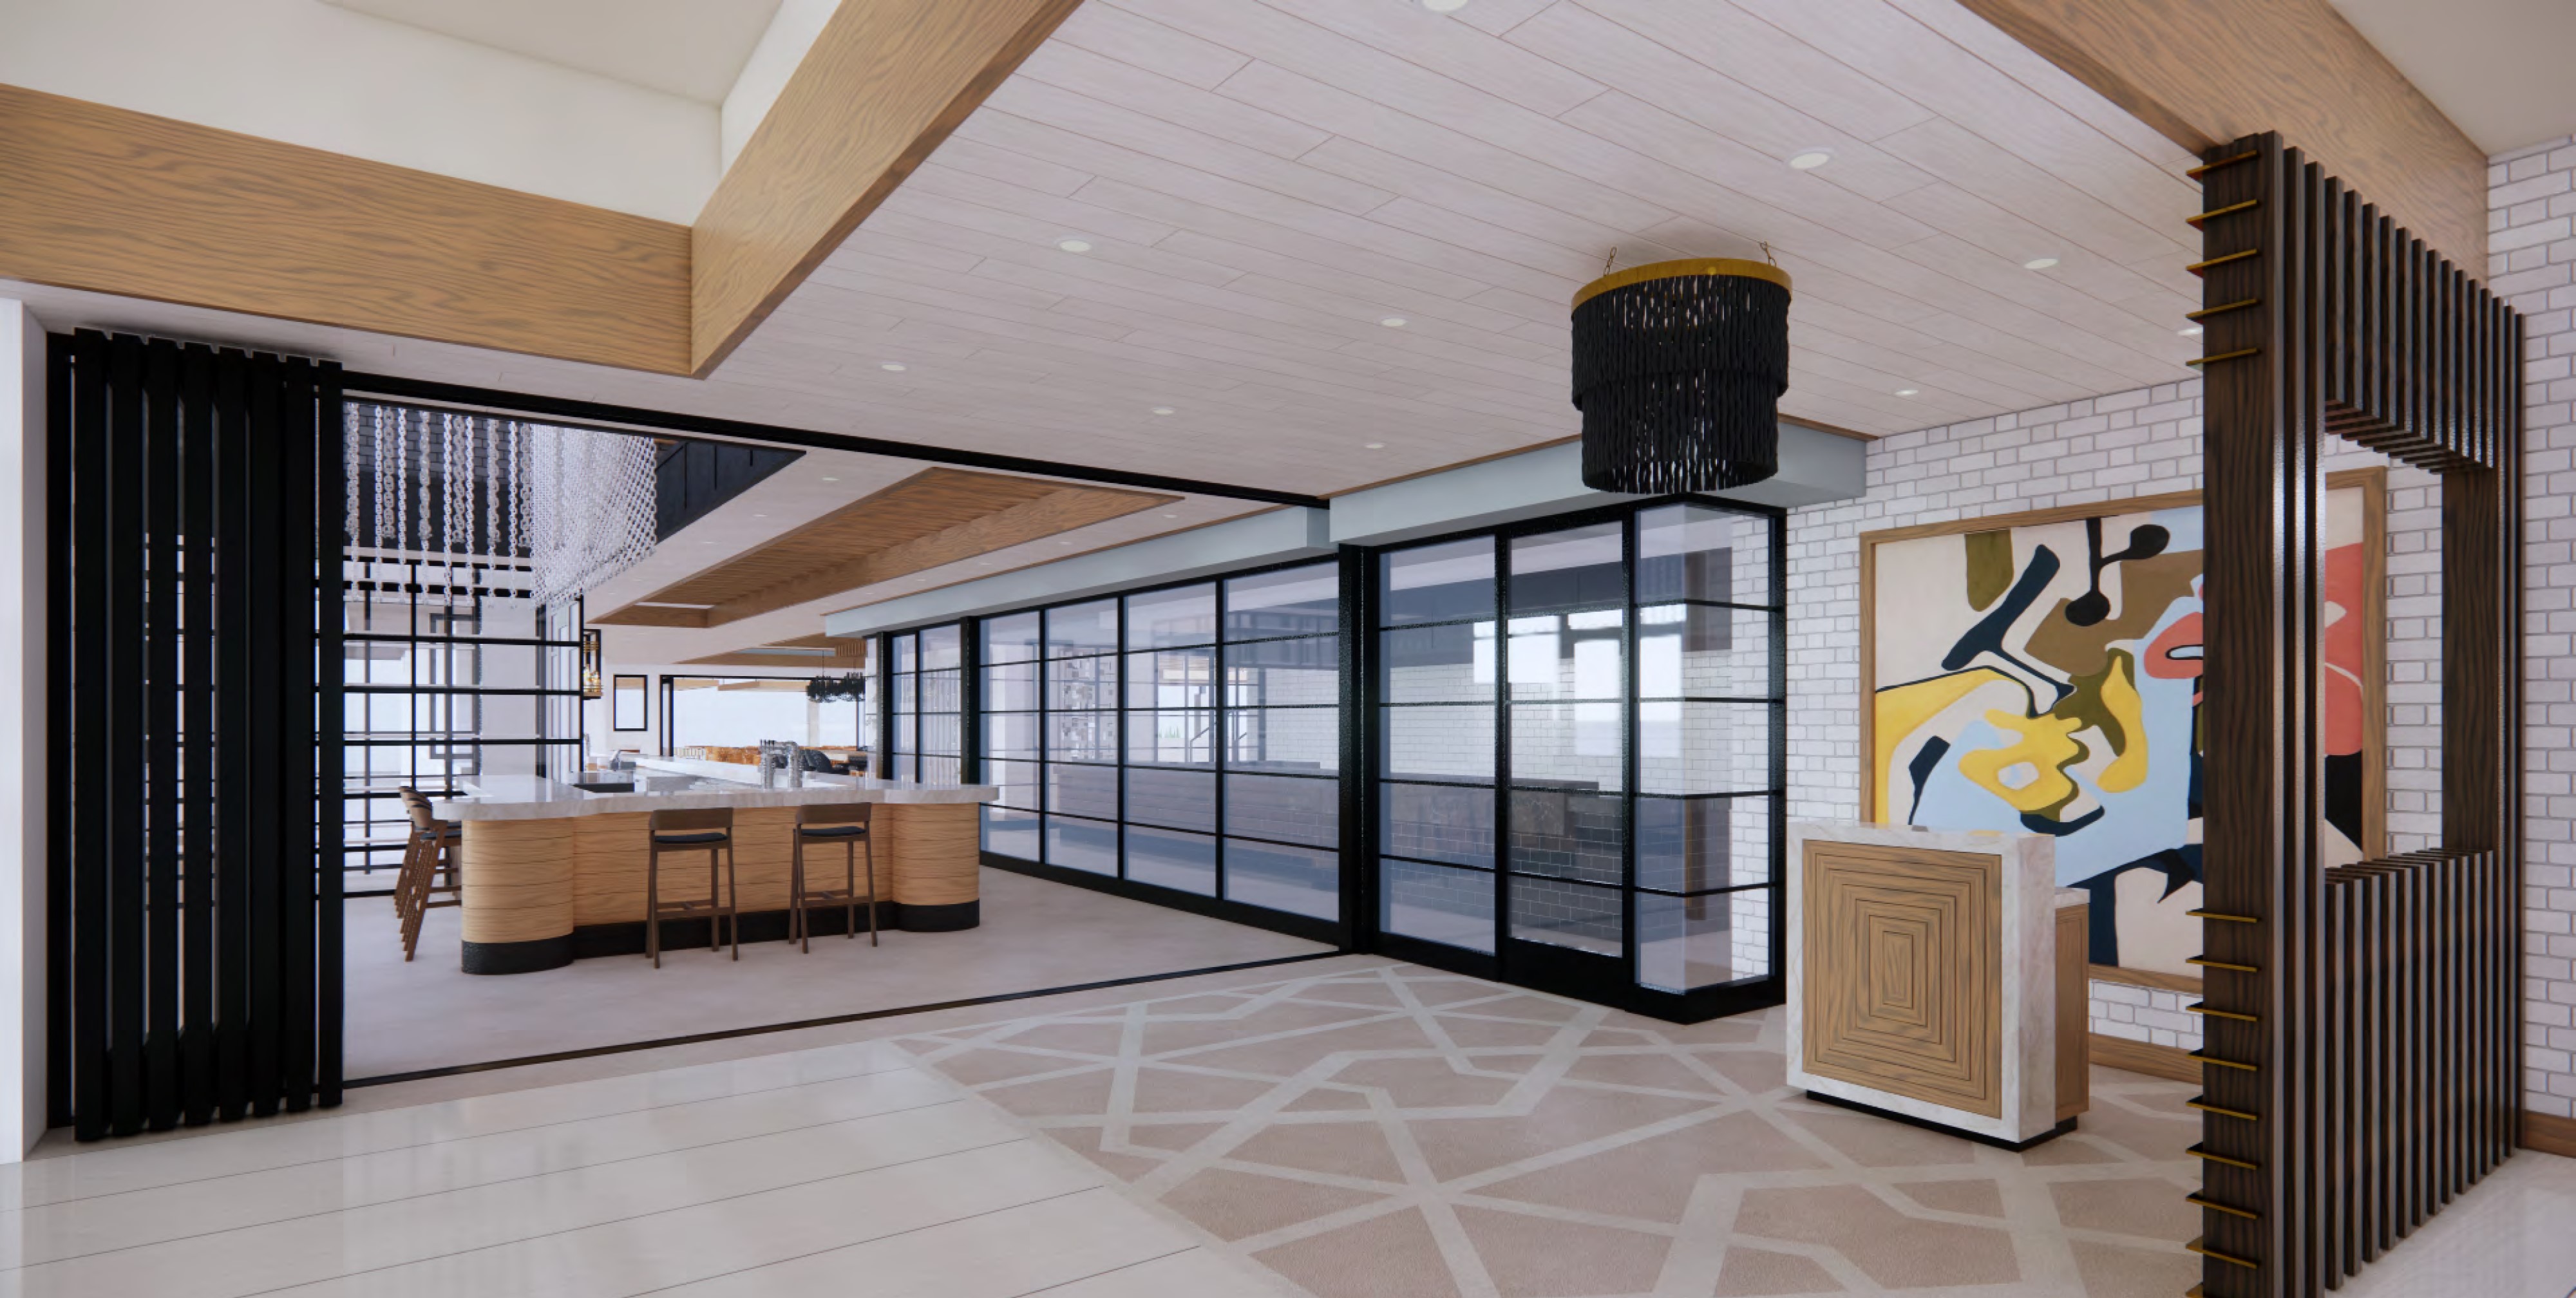 Modern office lobby featuring geometric floor patterns, abstract wall art, wooden accents, and sleek furniture under a vaulted ceiling in Huntington Beach, California.